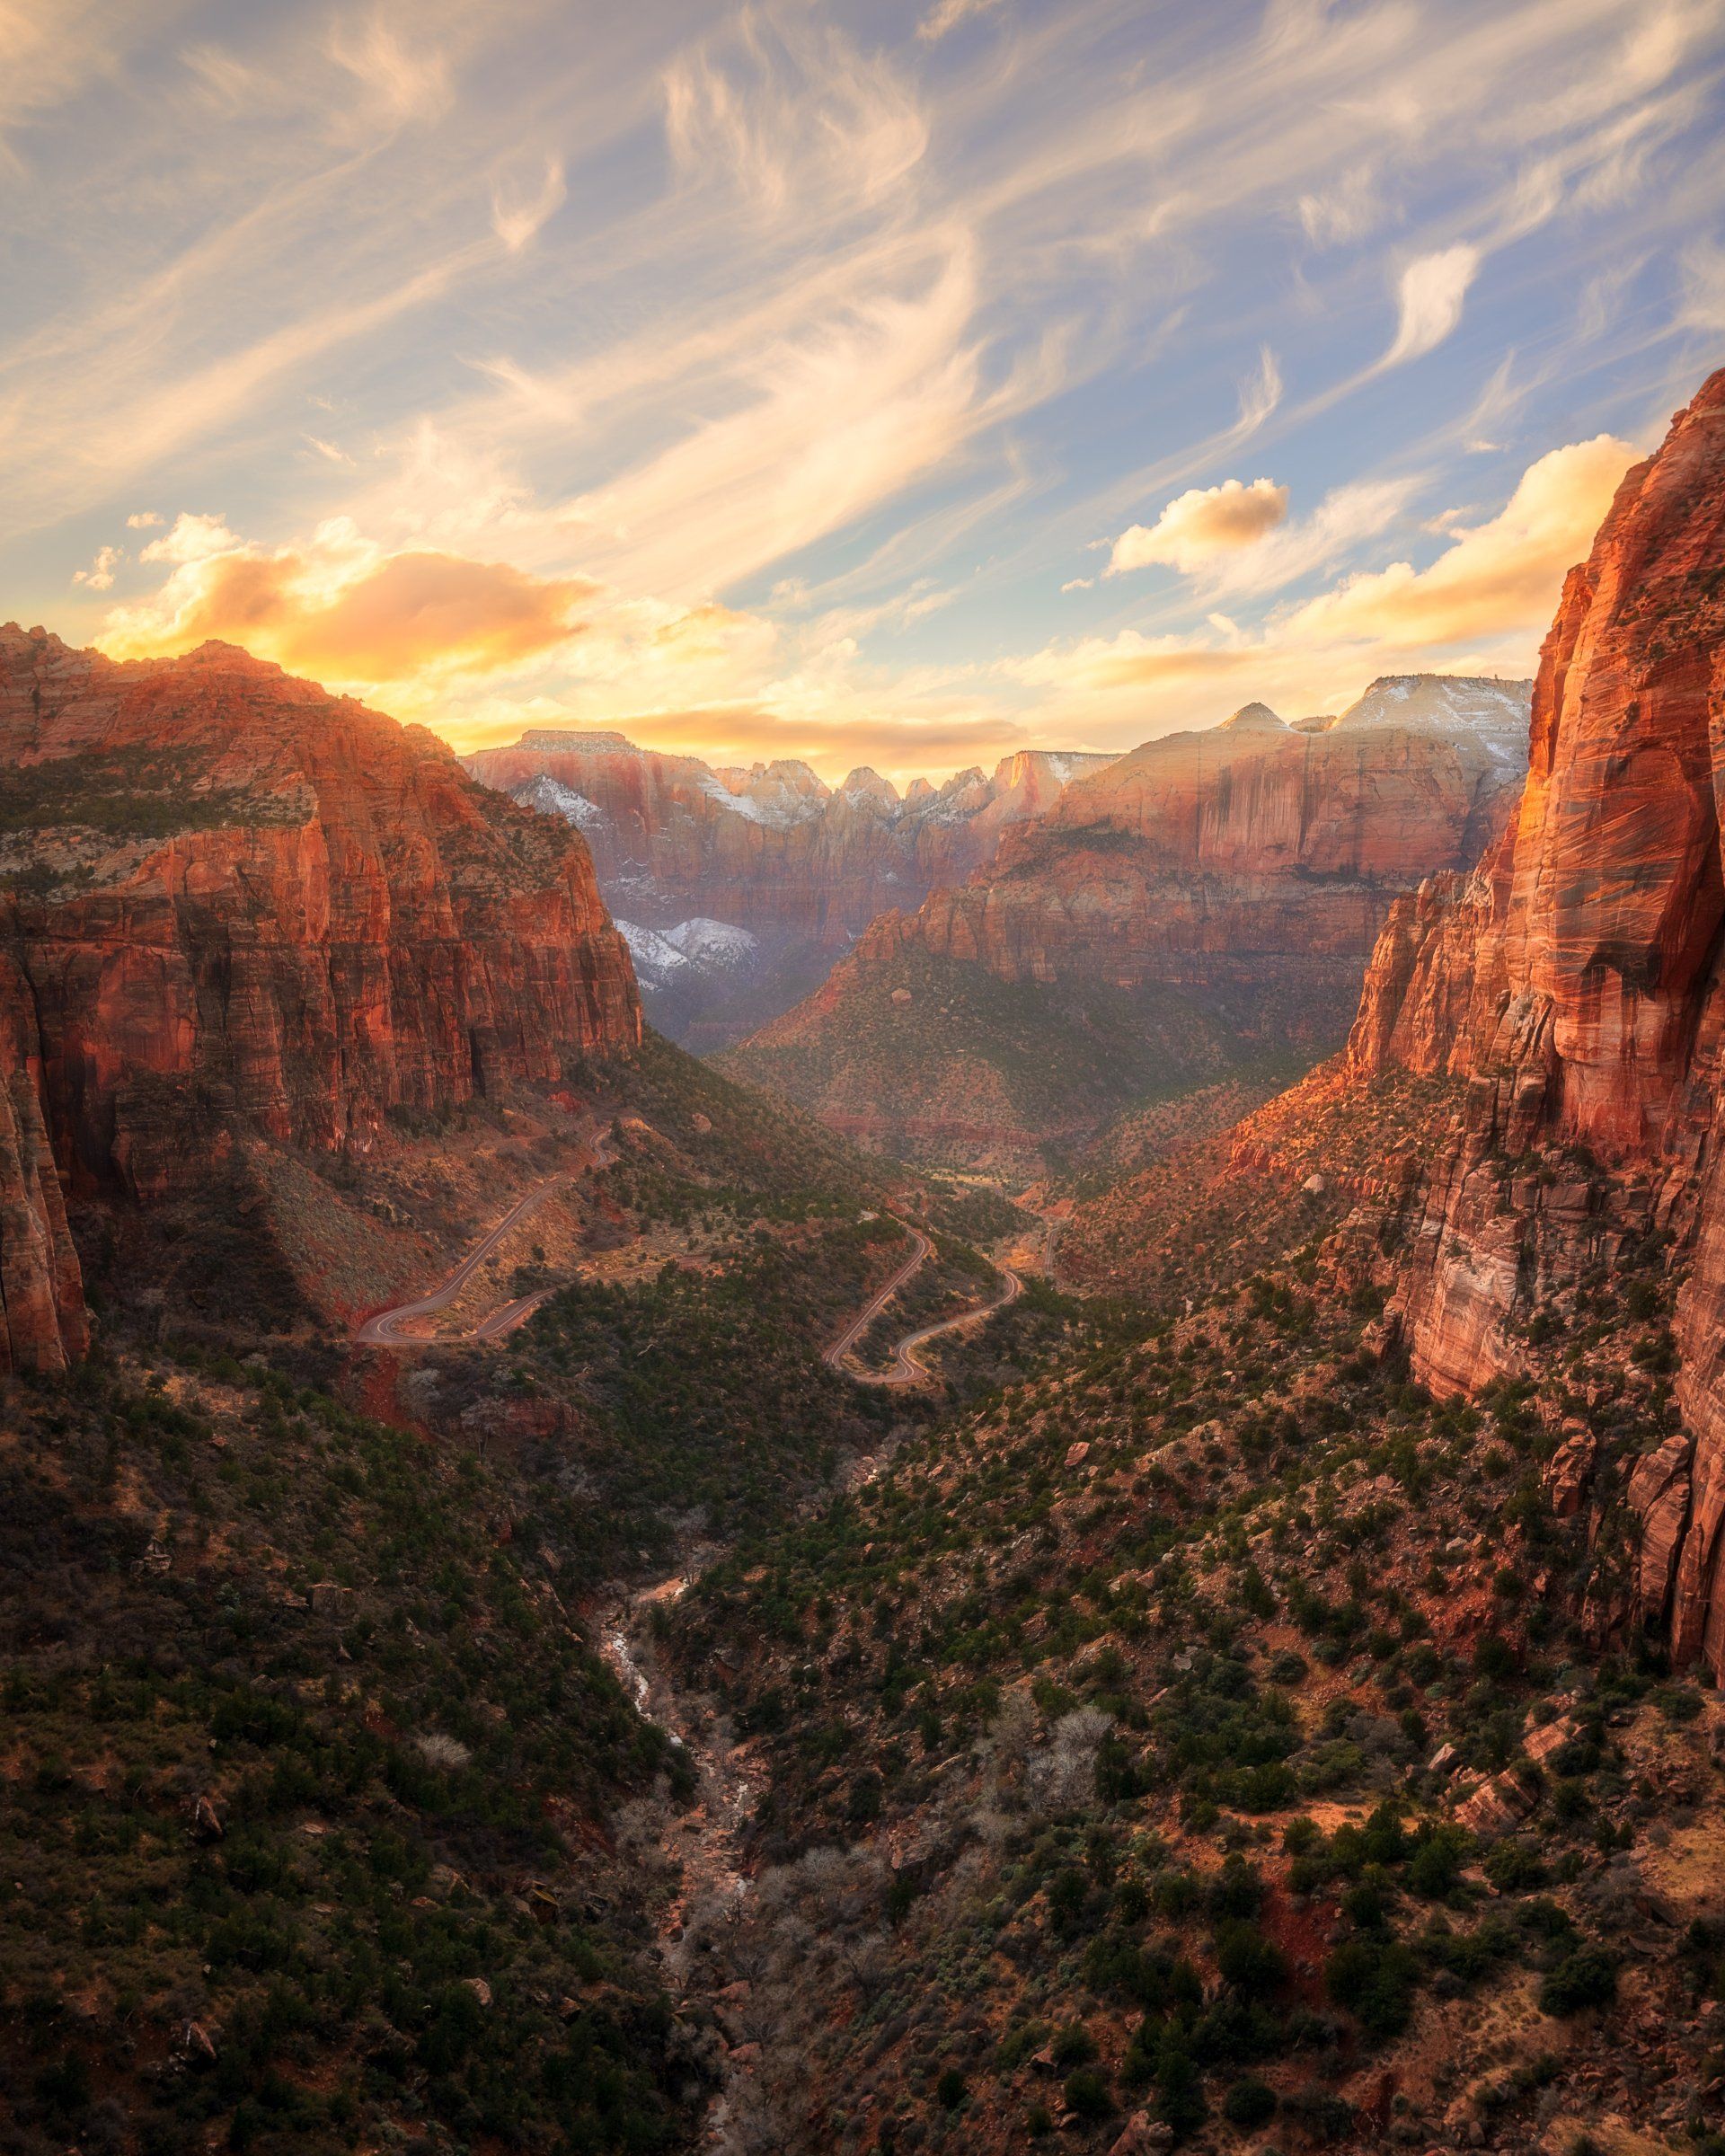 Zion National Park, National park in Utah, United States of America - USA and Canada Holidays Barter's Travelnet